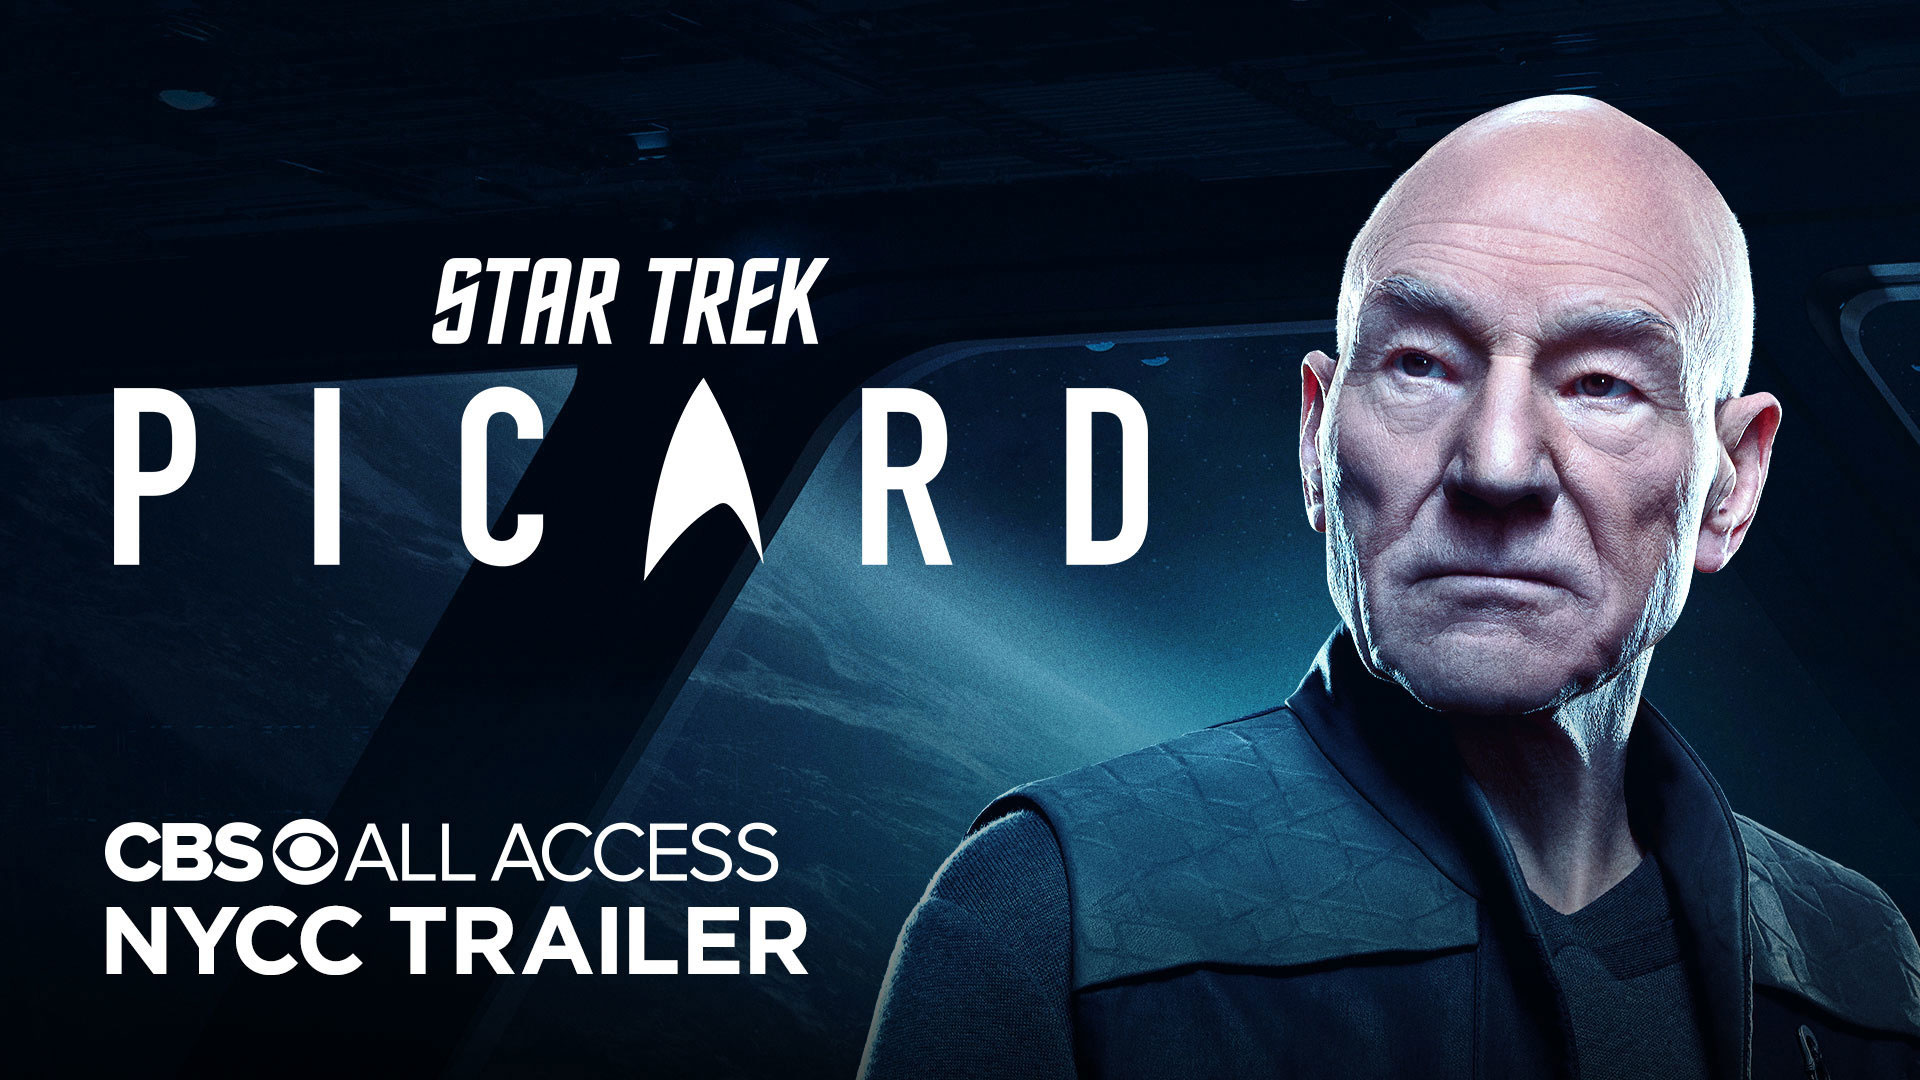 Watch The NYCC Trailer For Star Trek Picard, Coming To CBS All Access